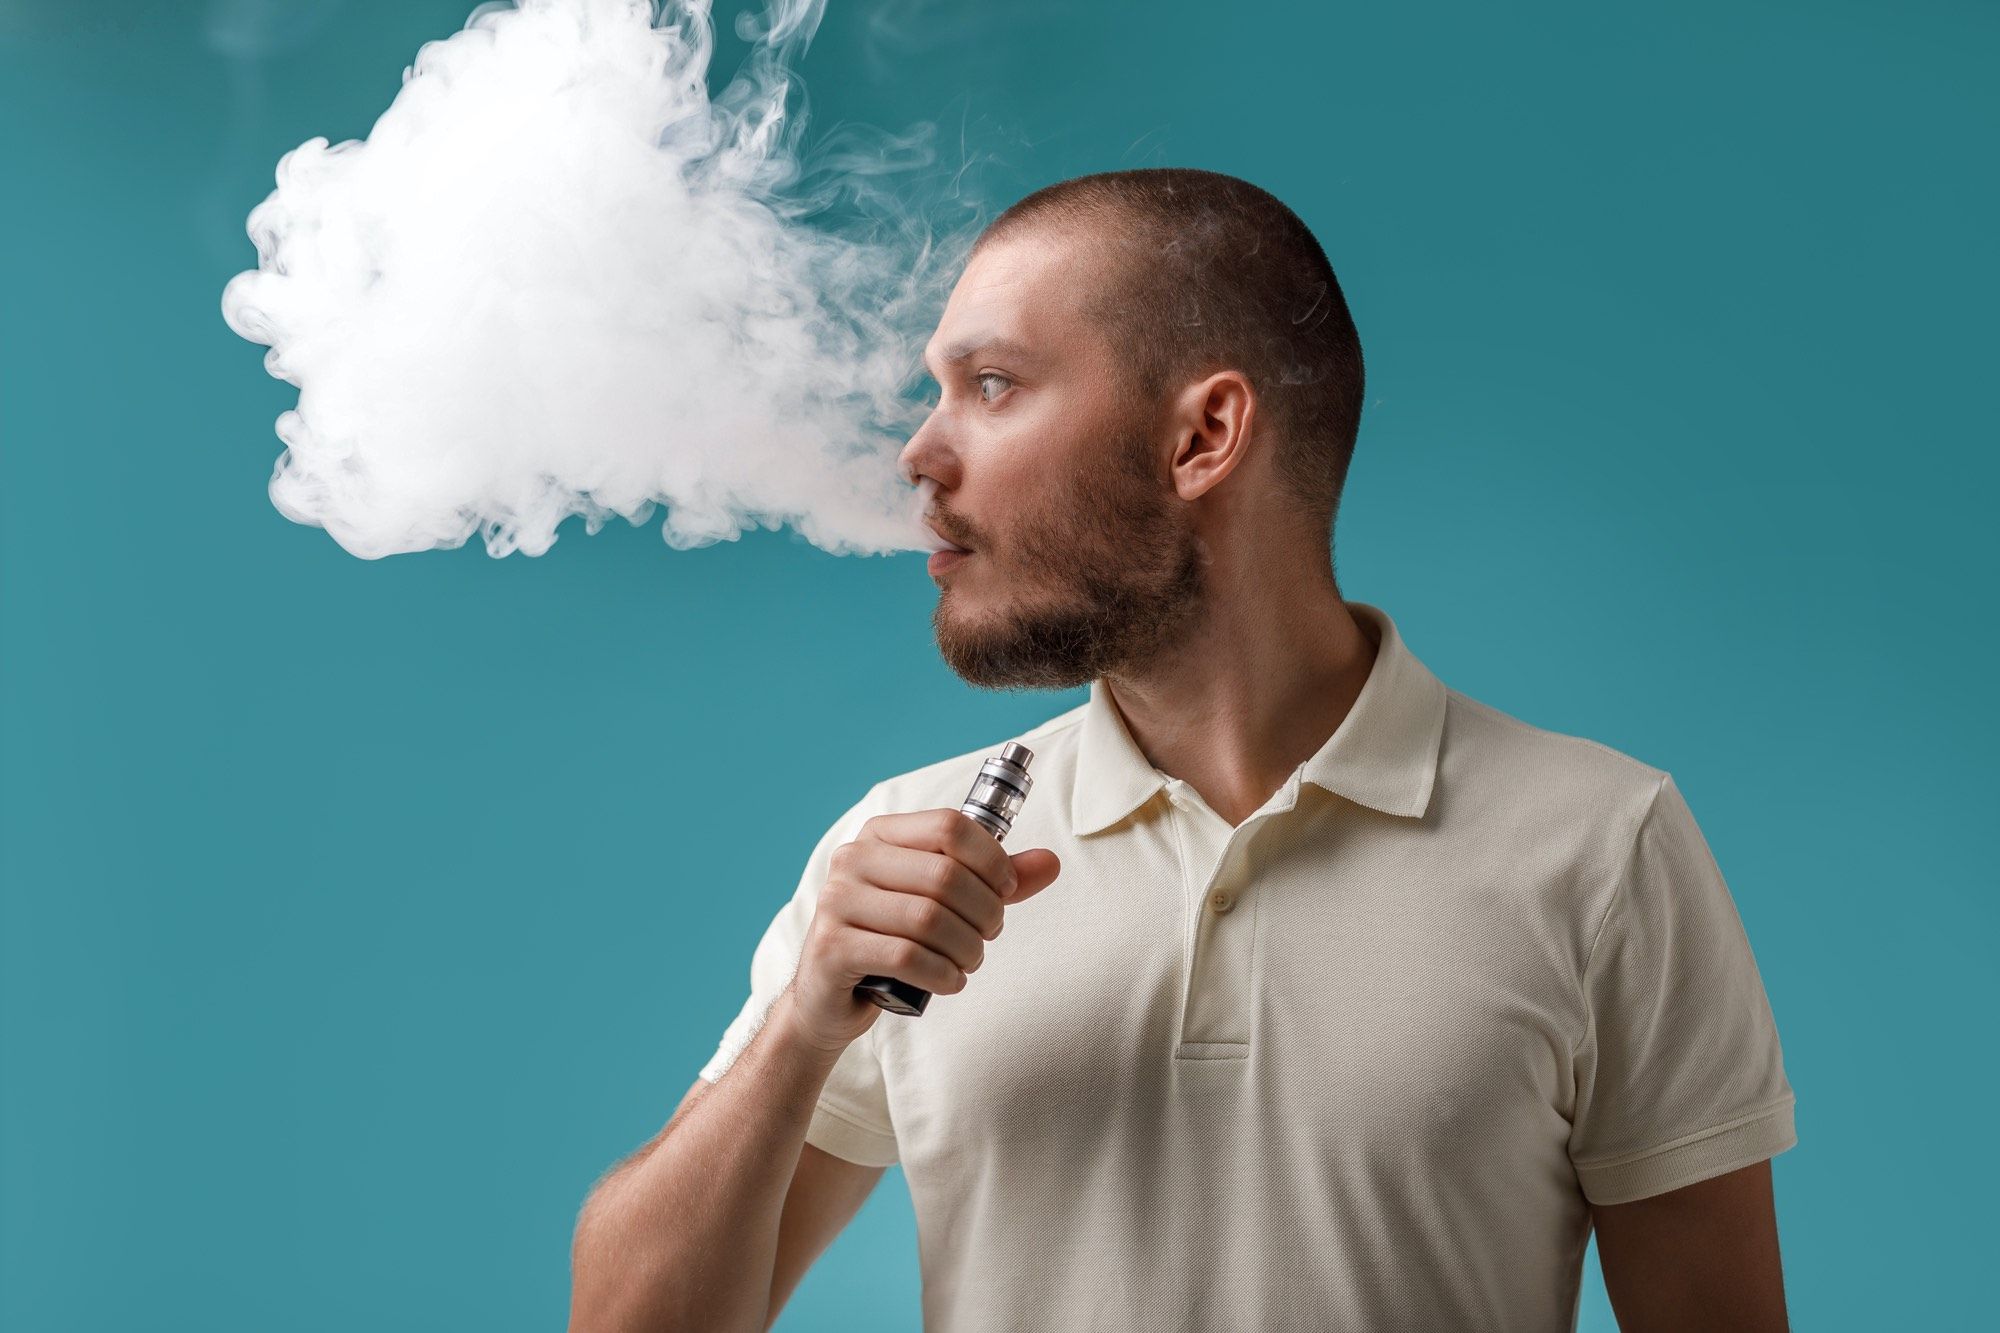 Man looks to his right and blows vape cloud.